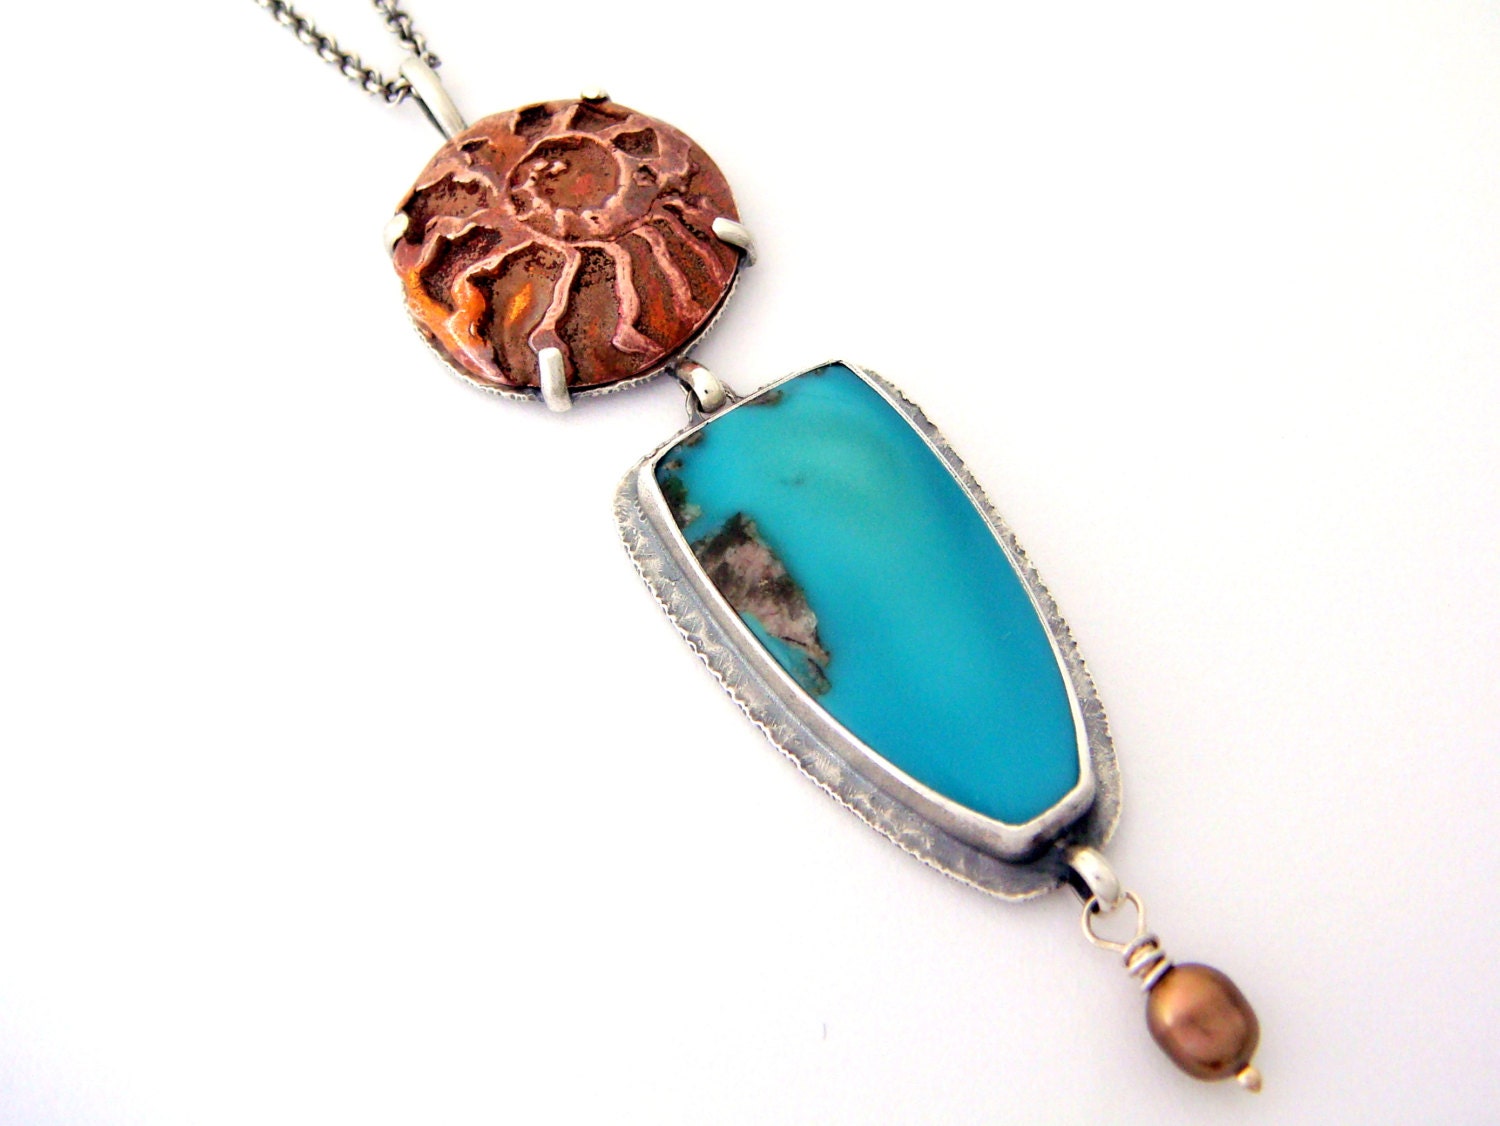 Beach Combing - Turquoise Necklace with Copper Ammonite and Pearl set in Sterling Silver - Carlin Mine Turquoise Necklace - SCJJewelryDesign